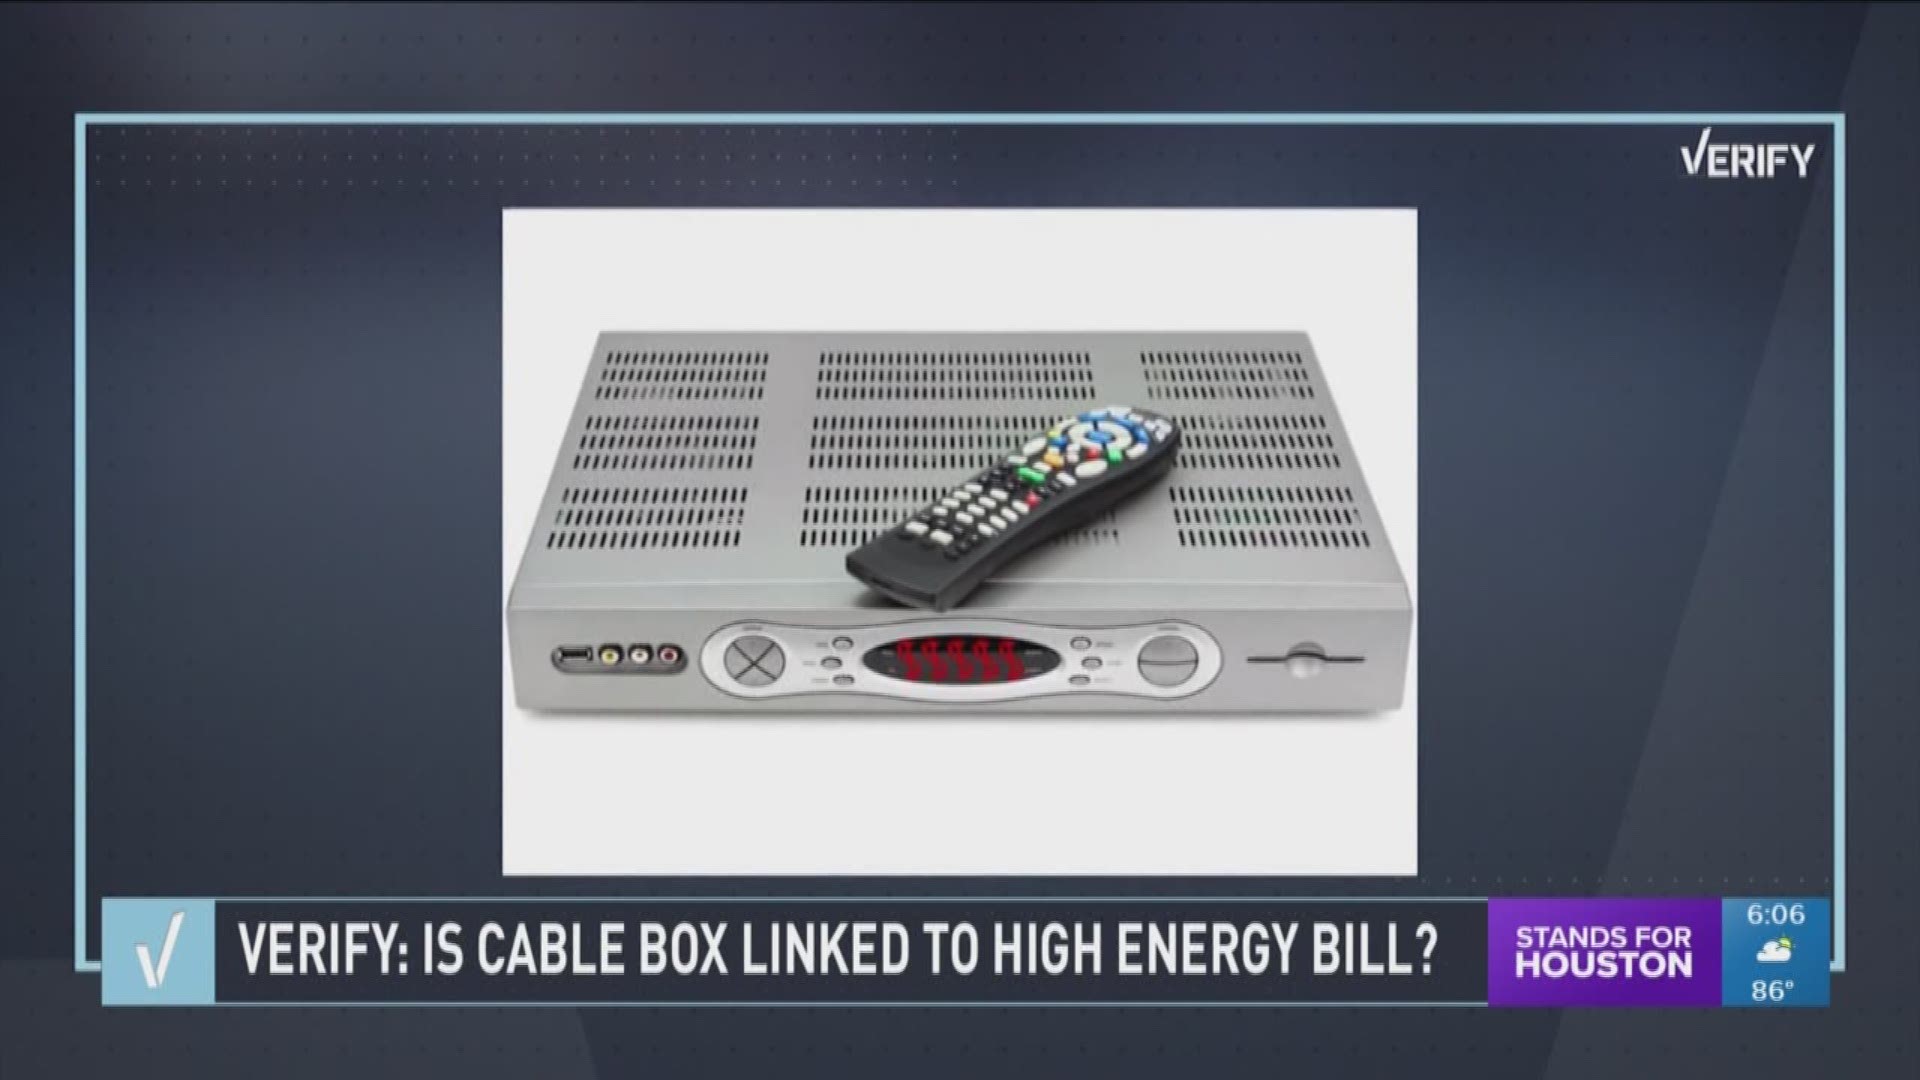 So many of us are looking for ways to cut costs. One theory suggests your cable box could be sucking up a lot of energy, but is it true? 